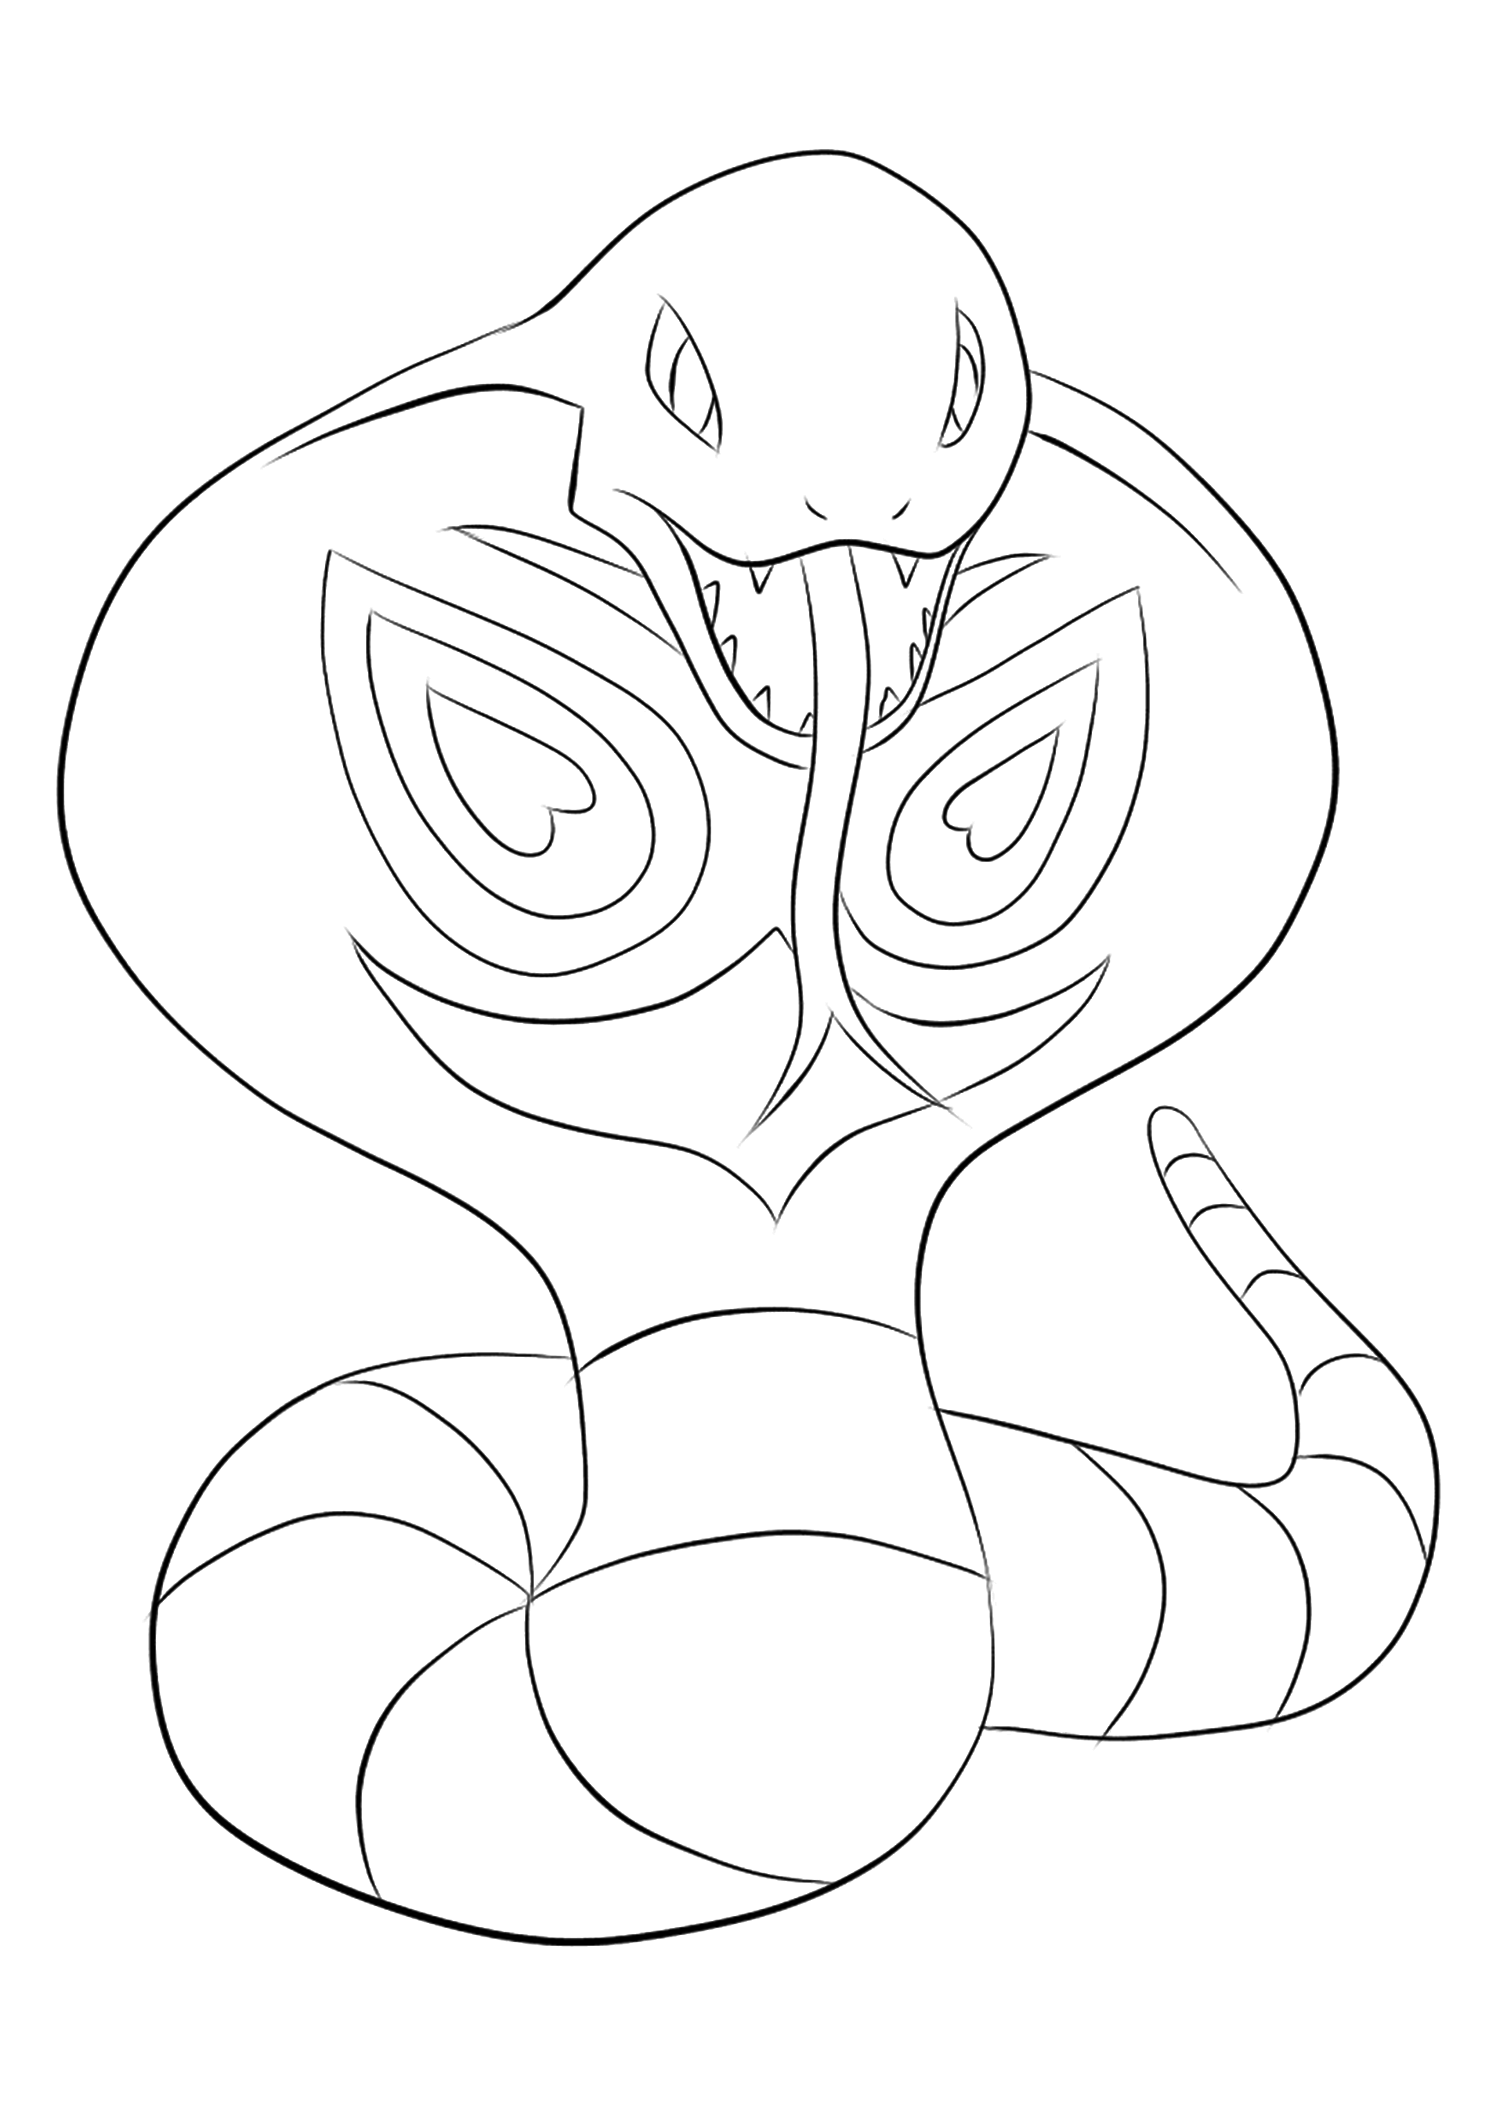 Arbok (No.24). Arbok Coloring page, Generation I Pokemon of type PoisonOriginal image credit: Pokemon linearts by Lilly Gerbil'font-size:smaller;color:gray'>Permission: All rights reserved © Pokemon company and Ken Sugimori.